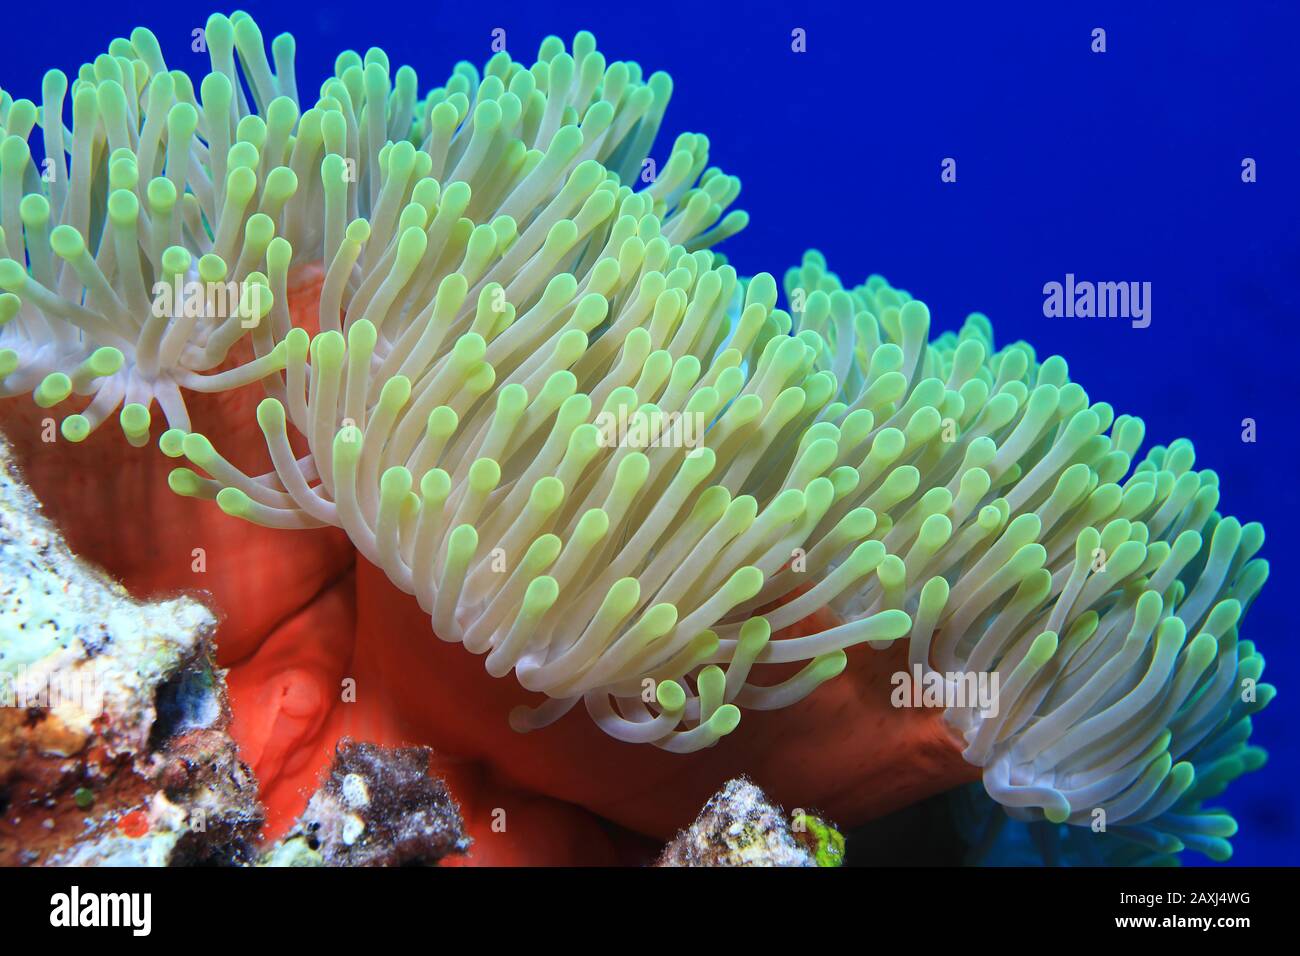 Magnificent sea anemone (Heteractis magnifica) underwater in the tropical coral reef of the indian ocean Stock Photo